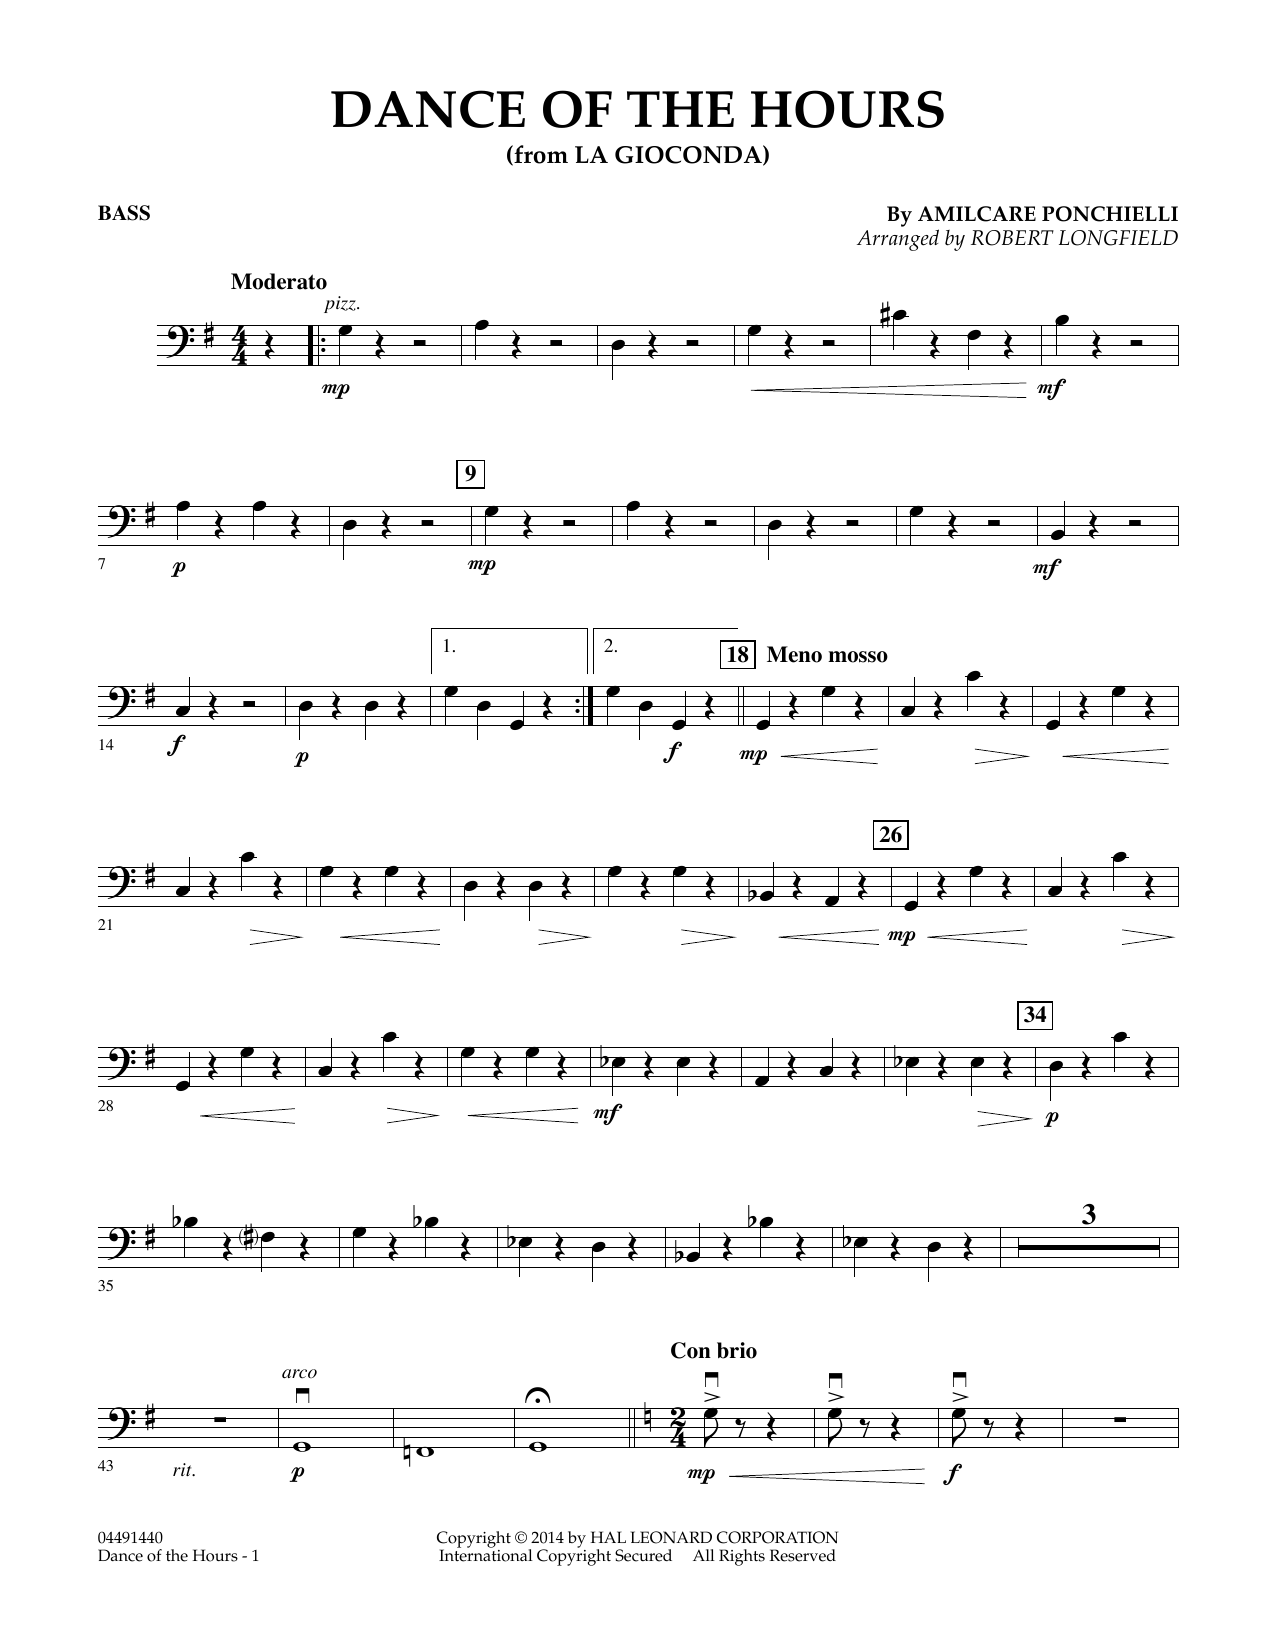 Amilcare Ponchielli Dance of the Hours (arr. Robert Longfield) - Bass sheet music notes and chords arranged for Orchestra